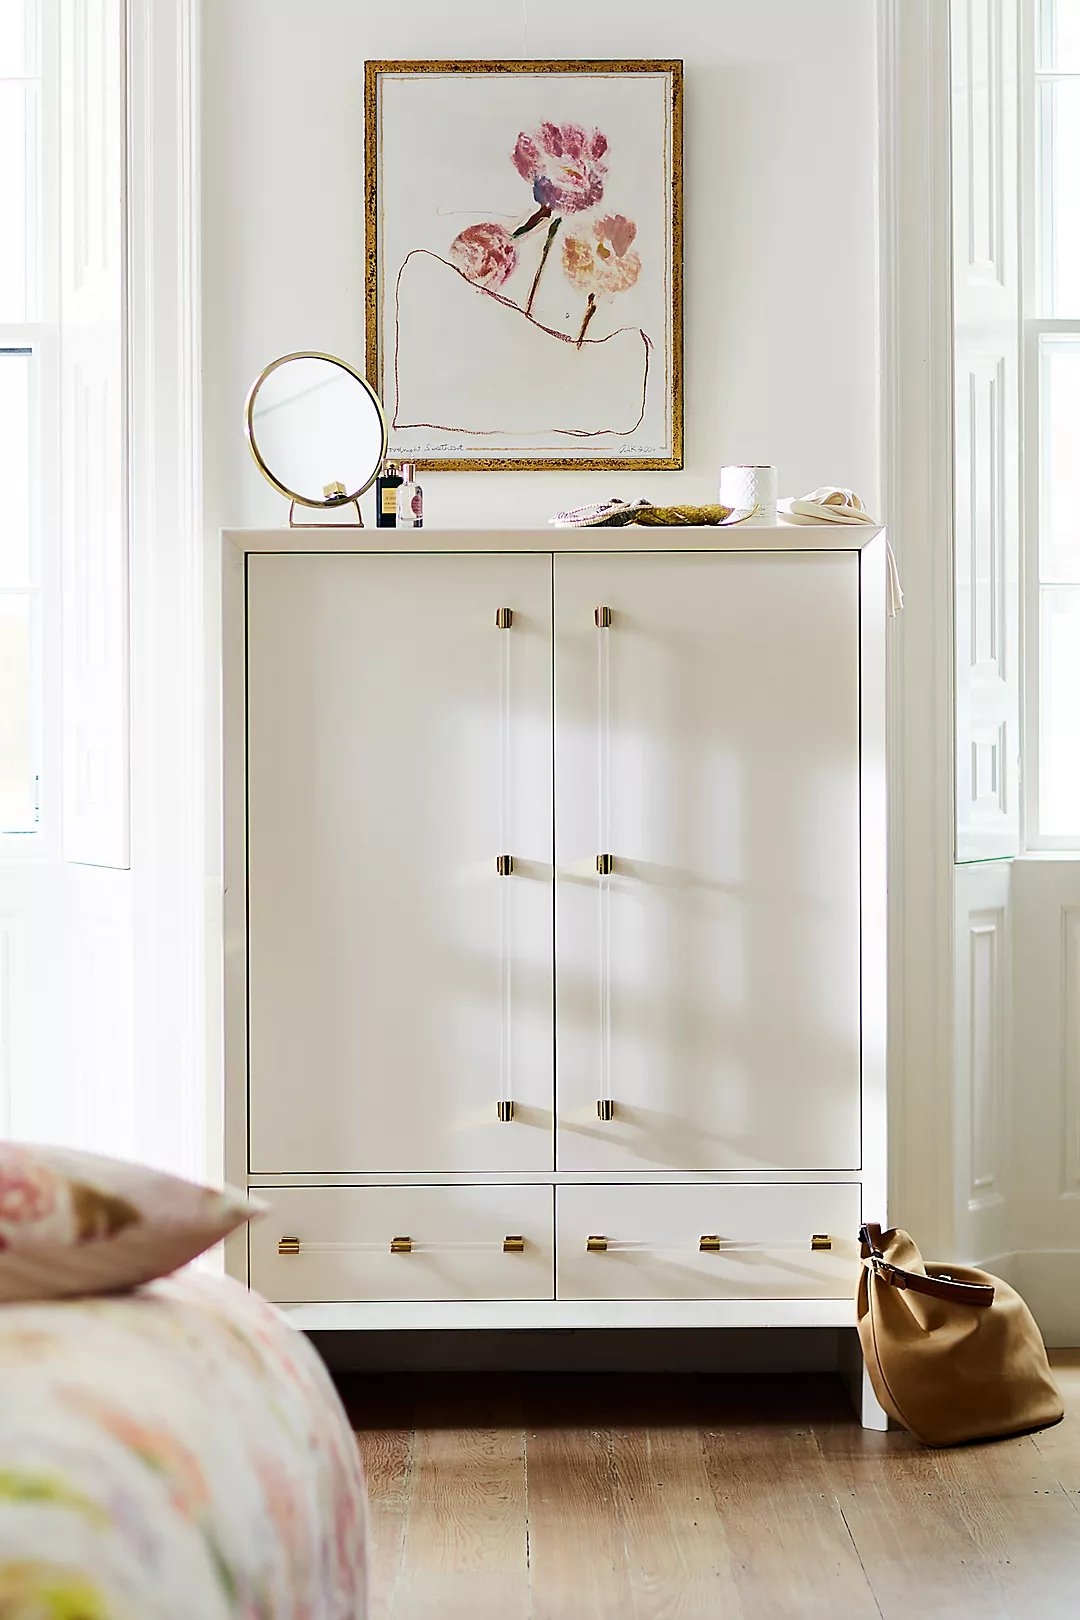 Merriton Armoire By Anthropologie in White - Image 6